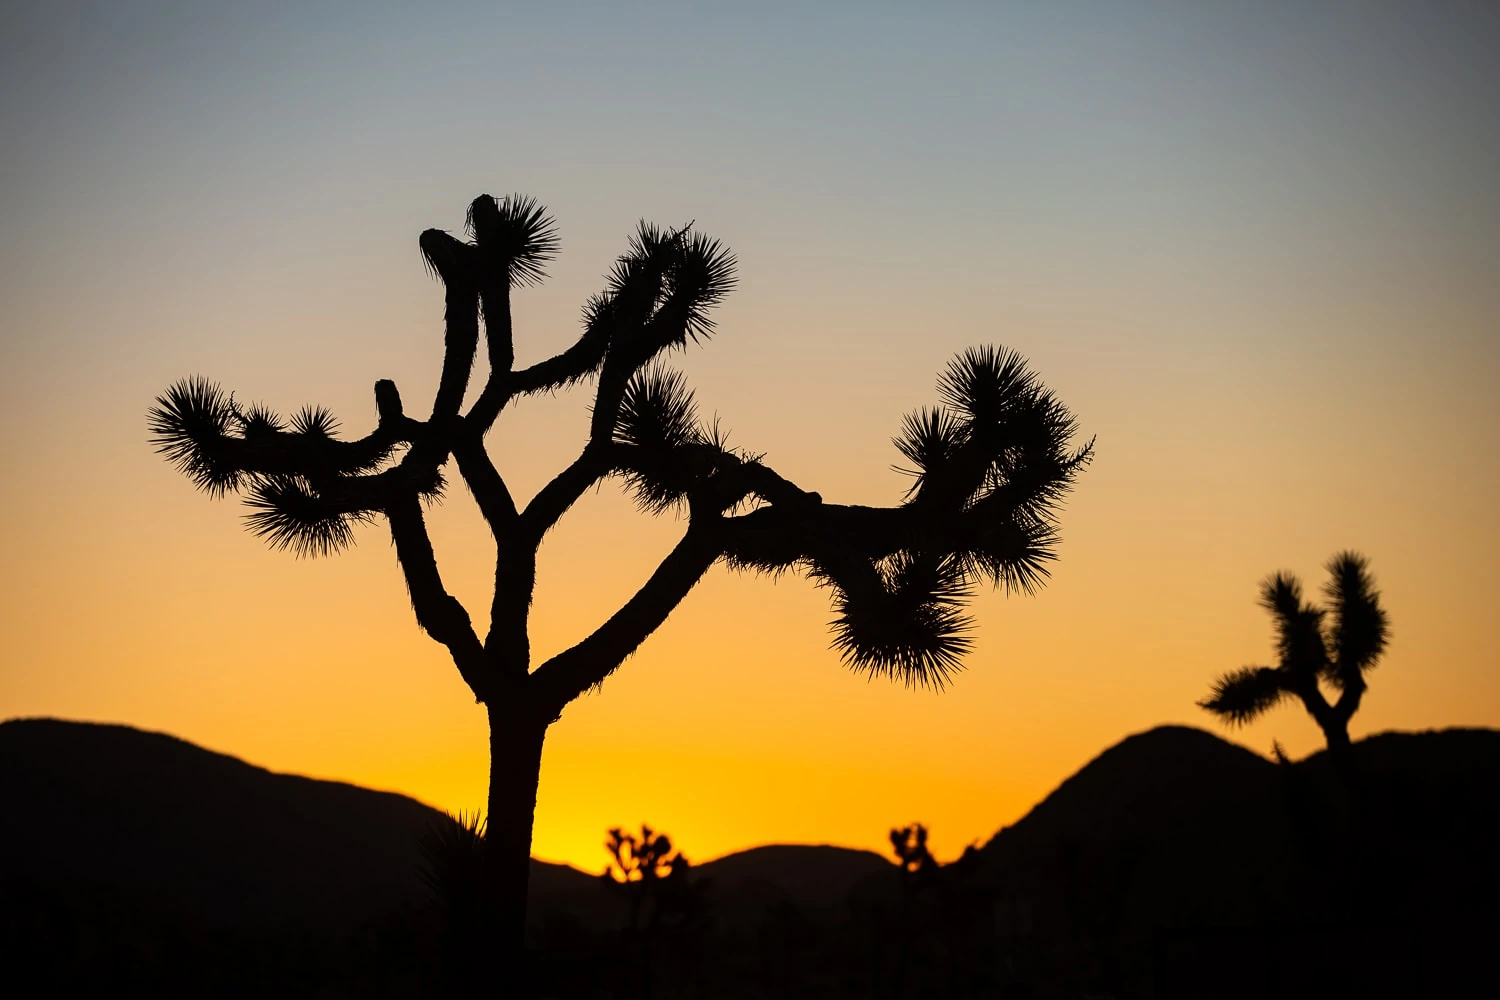 A joshua tree is silhouetted against a golden sunset in Joshua Tree National Park near lost horse picnic area.